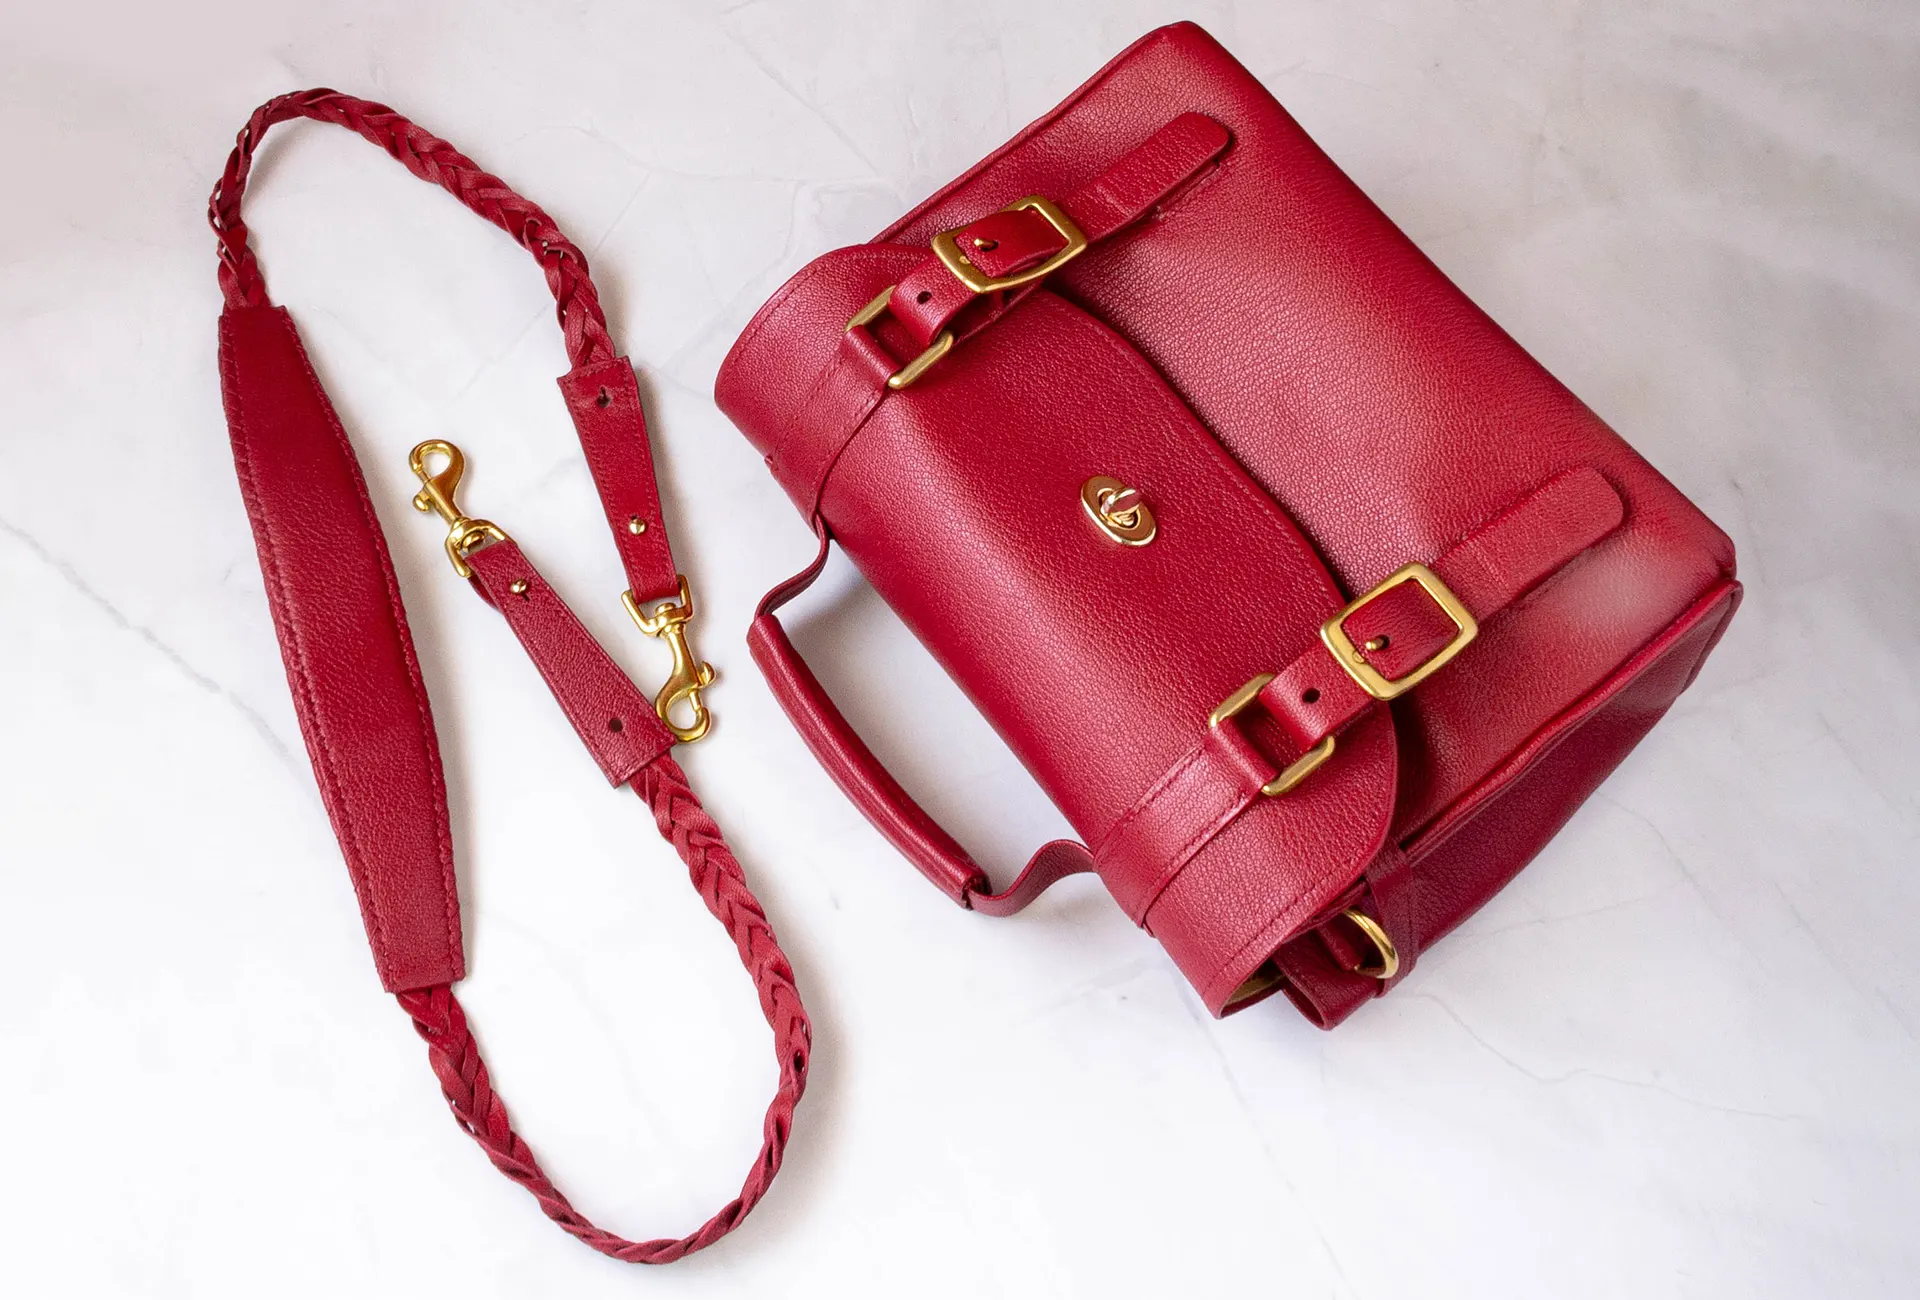 possala designs red leather satched bag